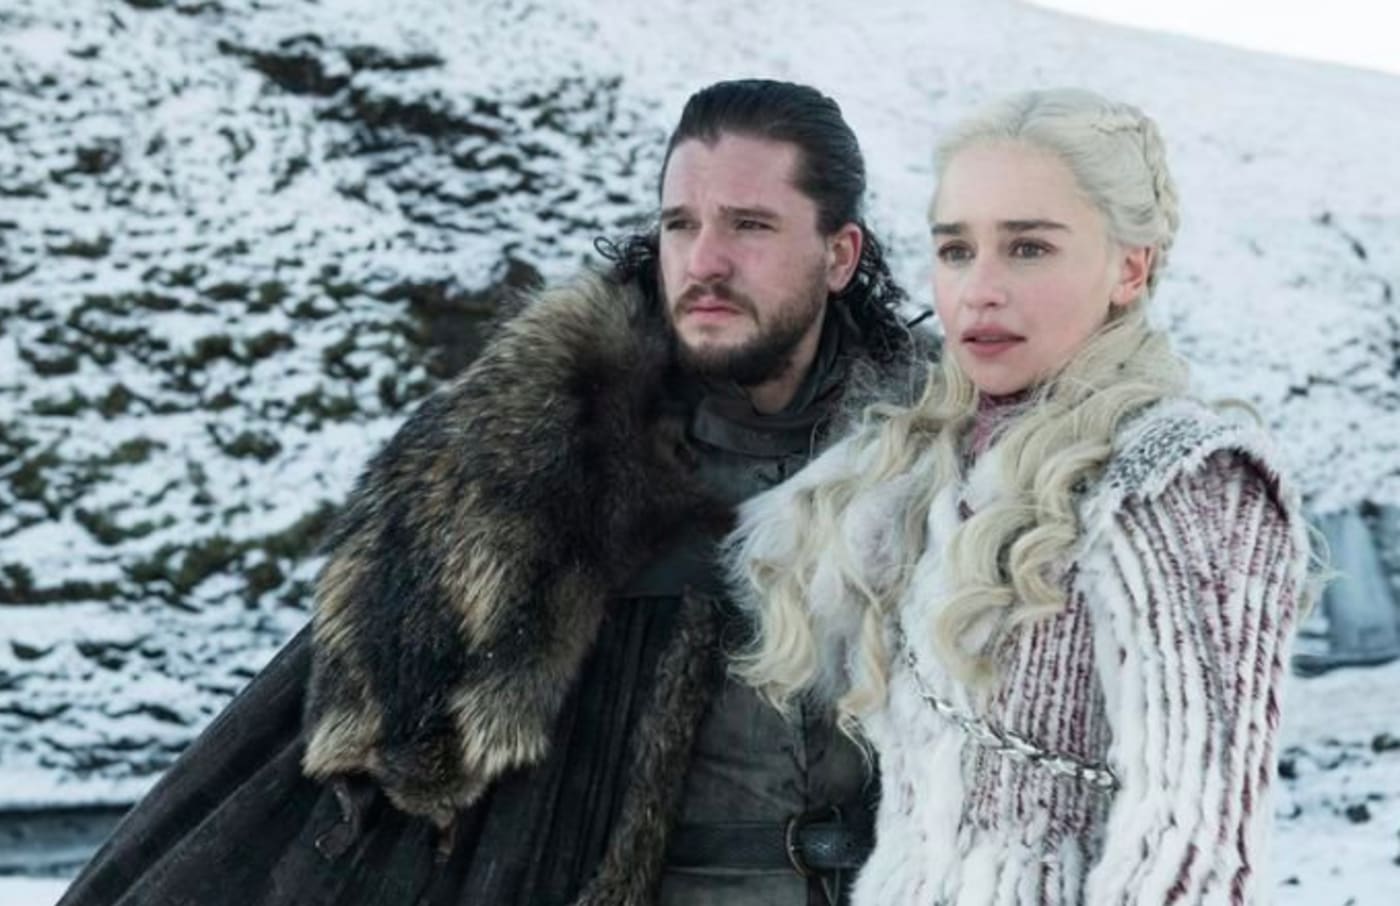 'Game of Thrones' Season 8: First Look Photos Released